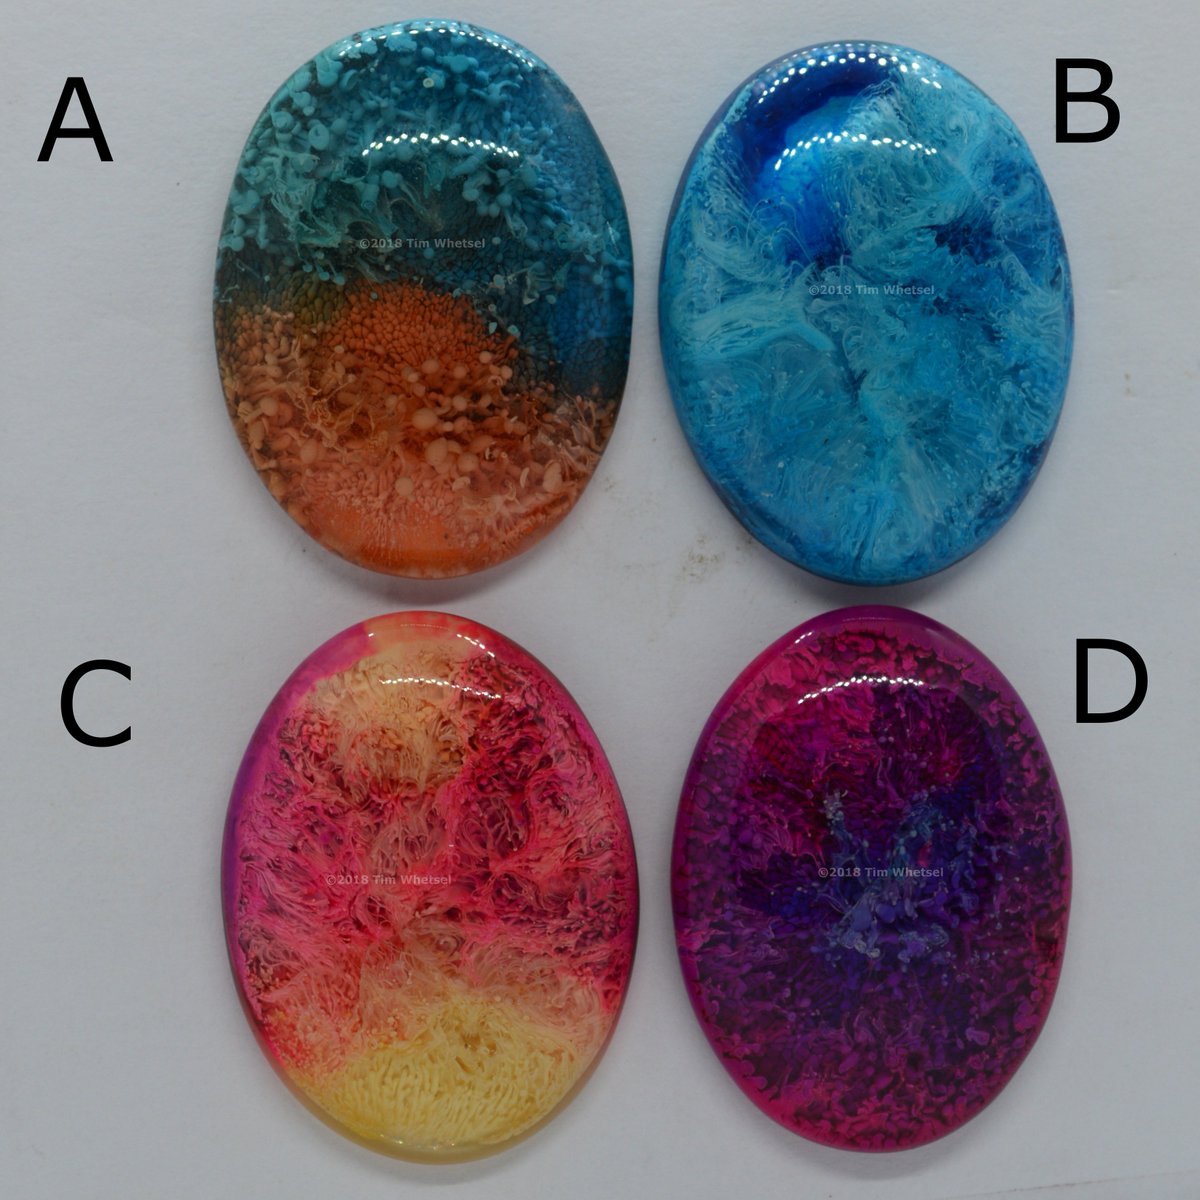 Resin Petri Cabochons available now for crafters. Or have one made into a pendant! Contact me if interested
#indiebizhour  #womaninbiz #HandmadeHour #handmadewithlove #crafthour #cabochons #resin #NeverForget